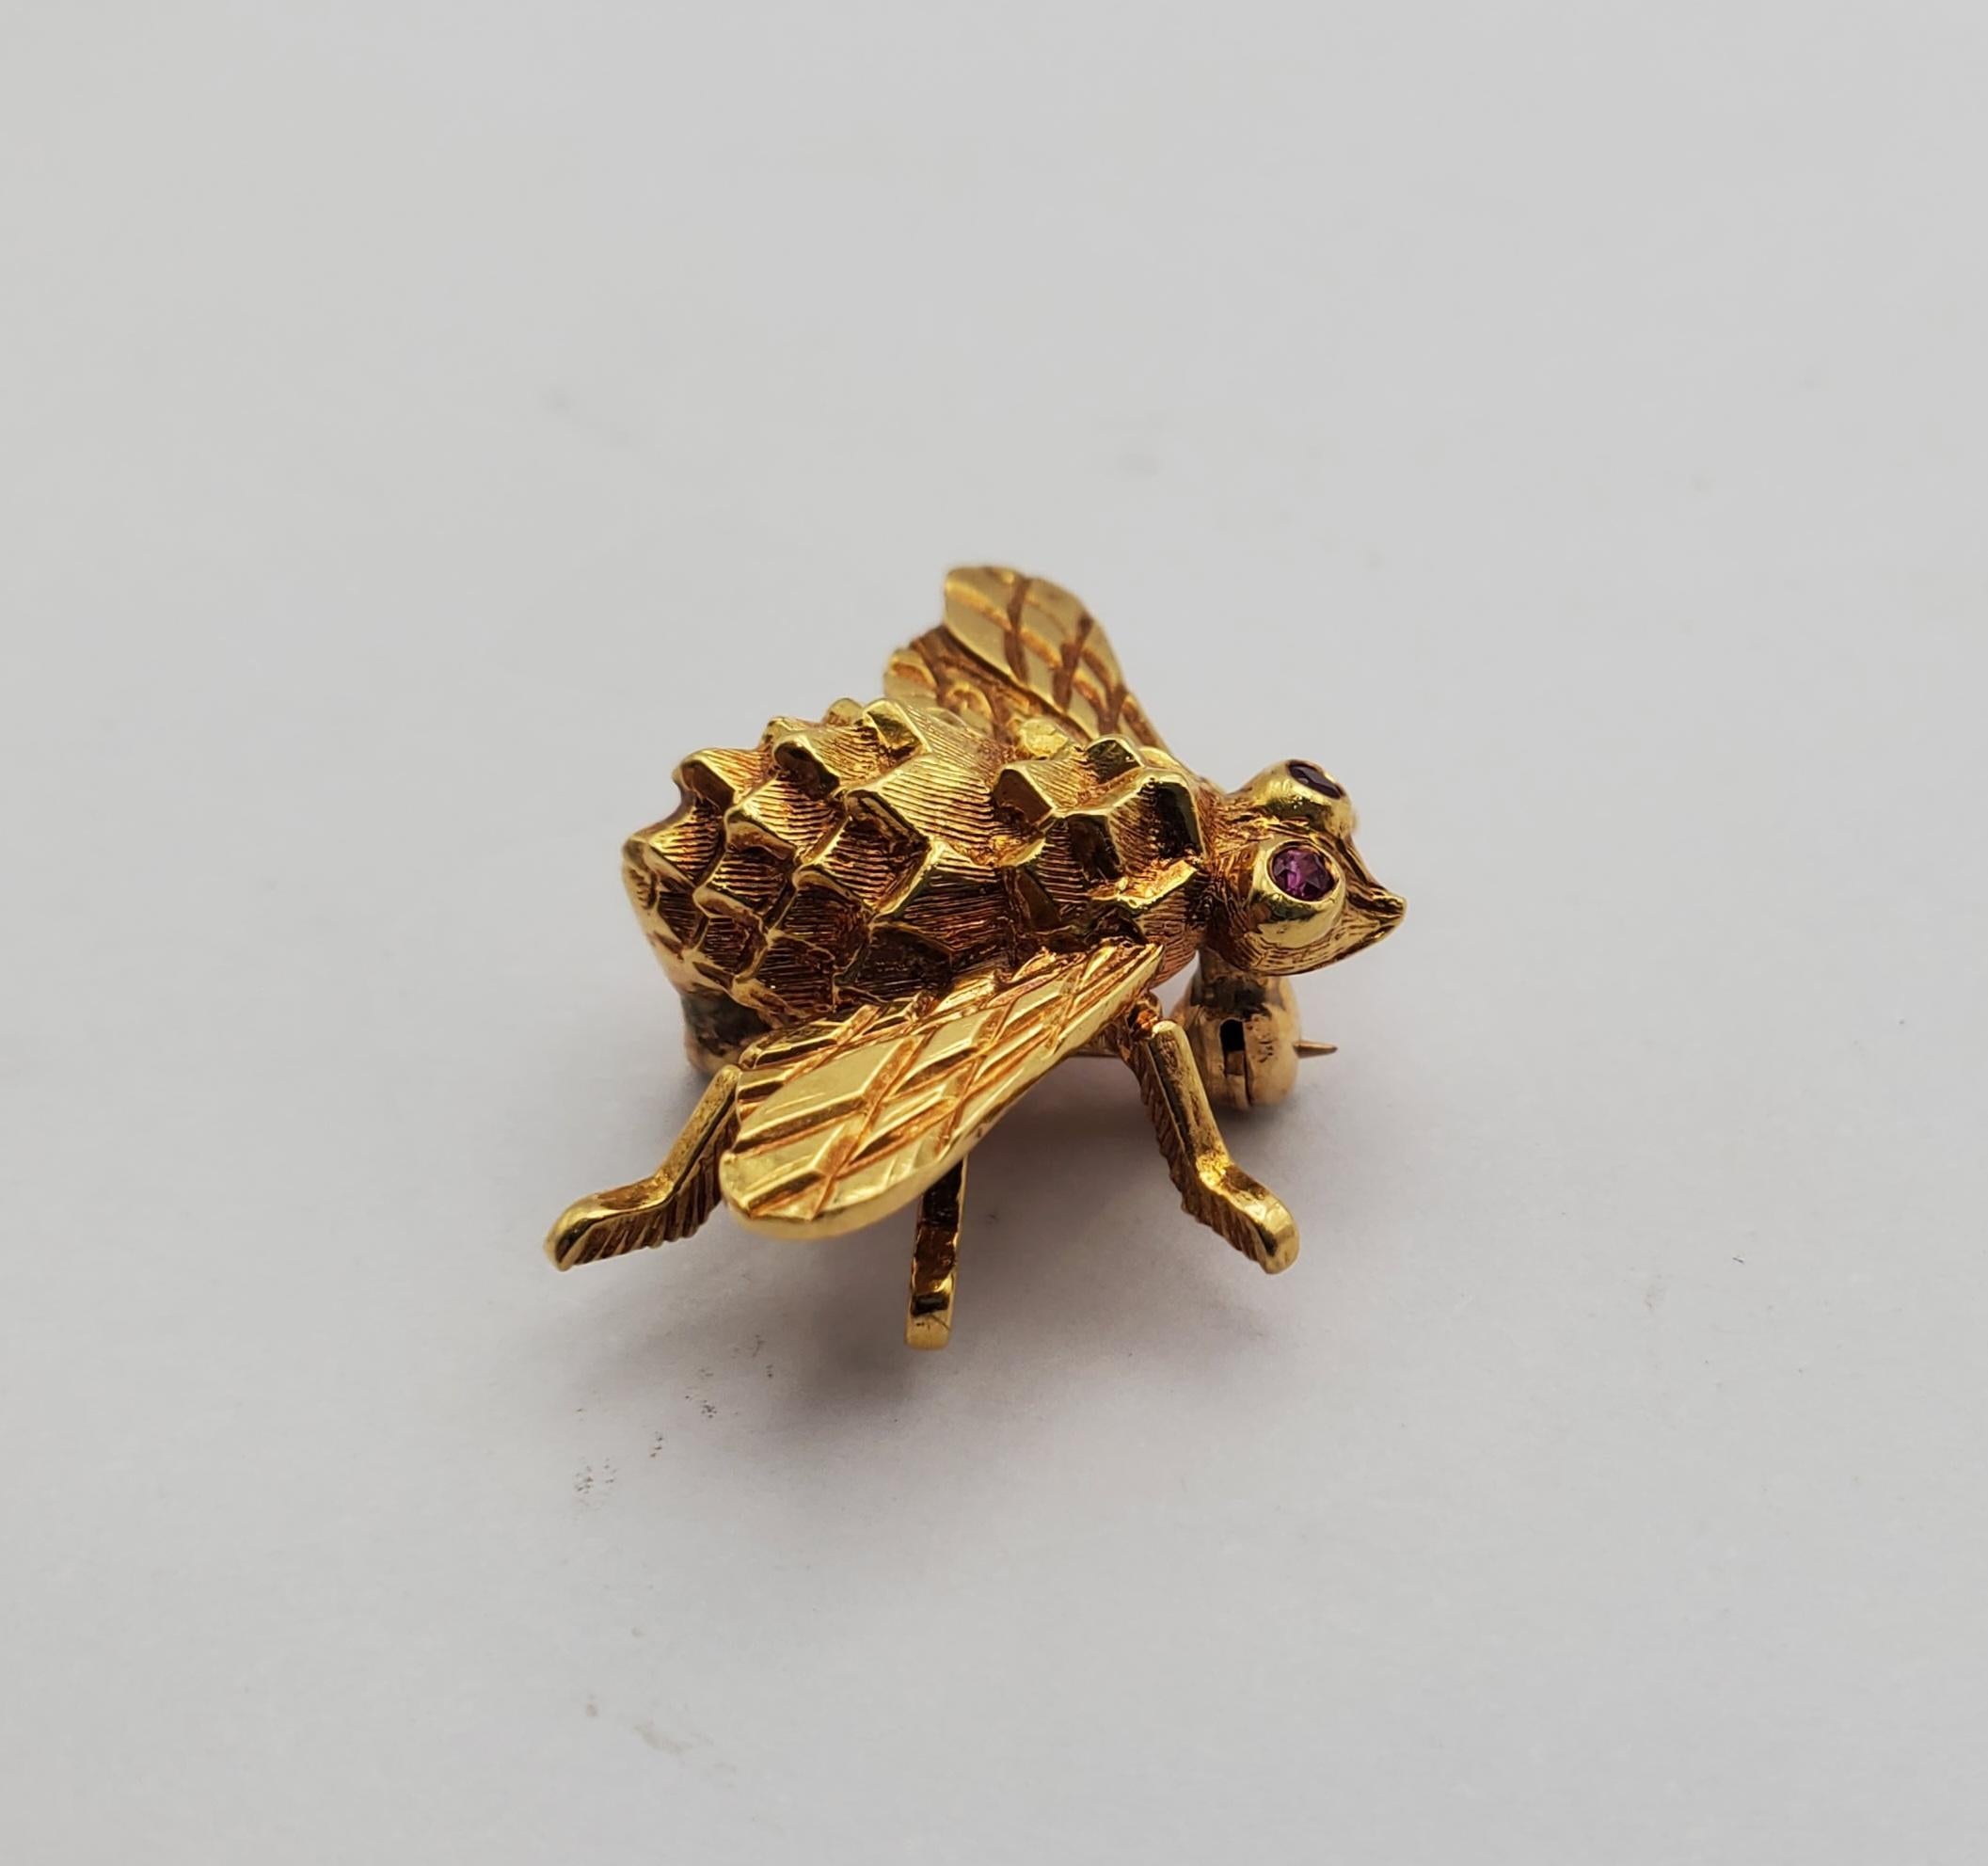 This charming bee pin by Herbert Rosenthal features intricate detail, crafted in 18k yellow gold with round natural rubies for eyes. The exquisite design displays high quality workmanship with its truly outstanding and realistic appearance. The